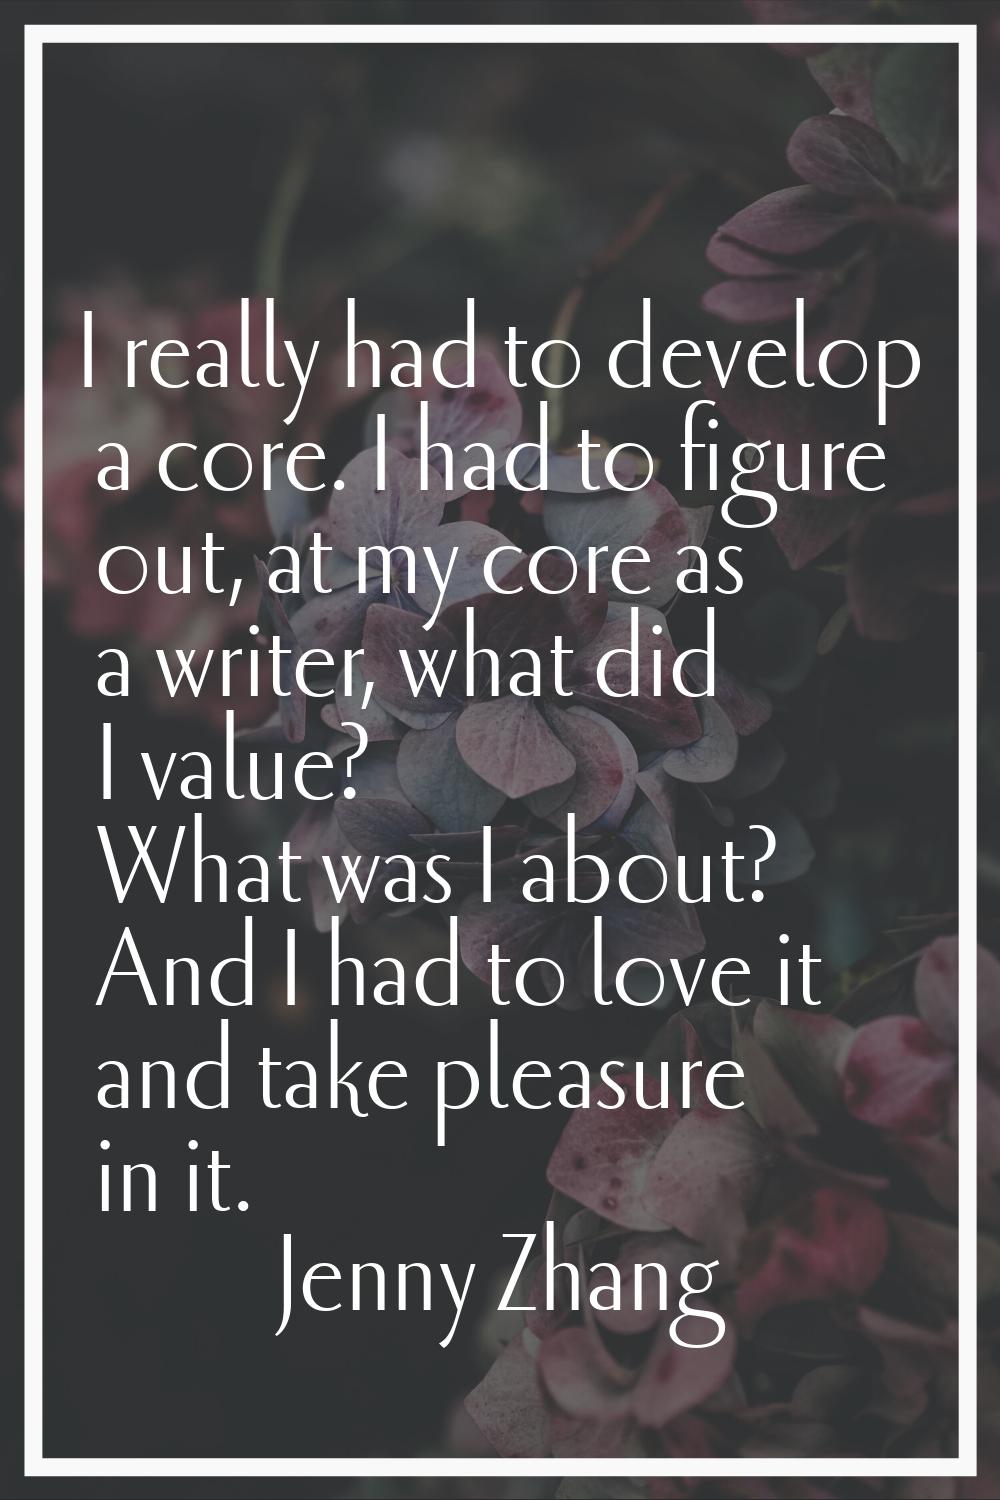 I really had to develop a core. I had to figure out, at my core as a writer, what did I value? What